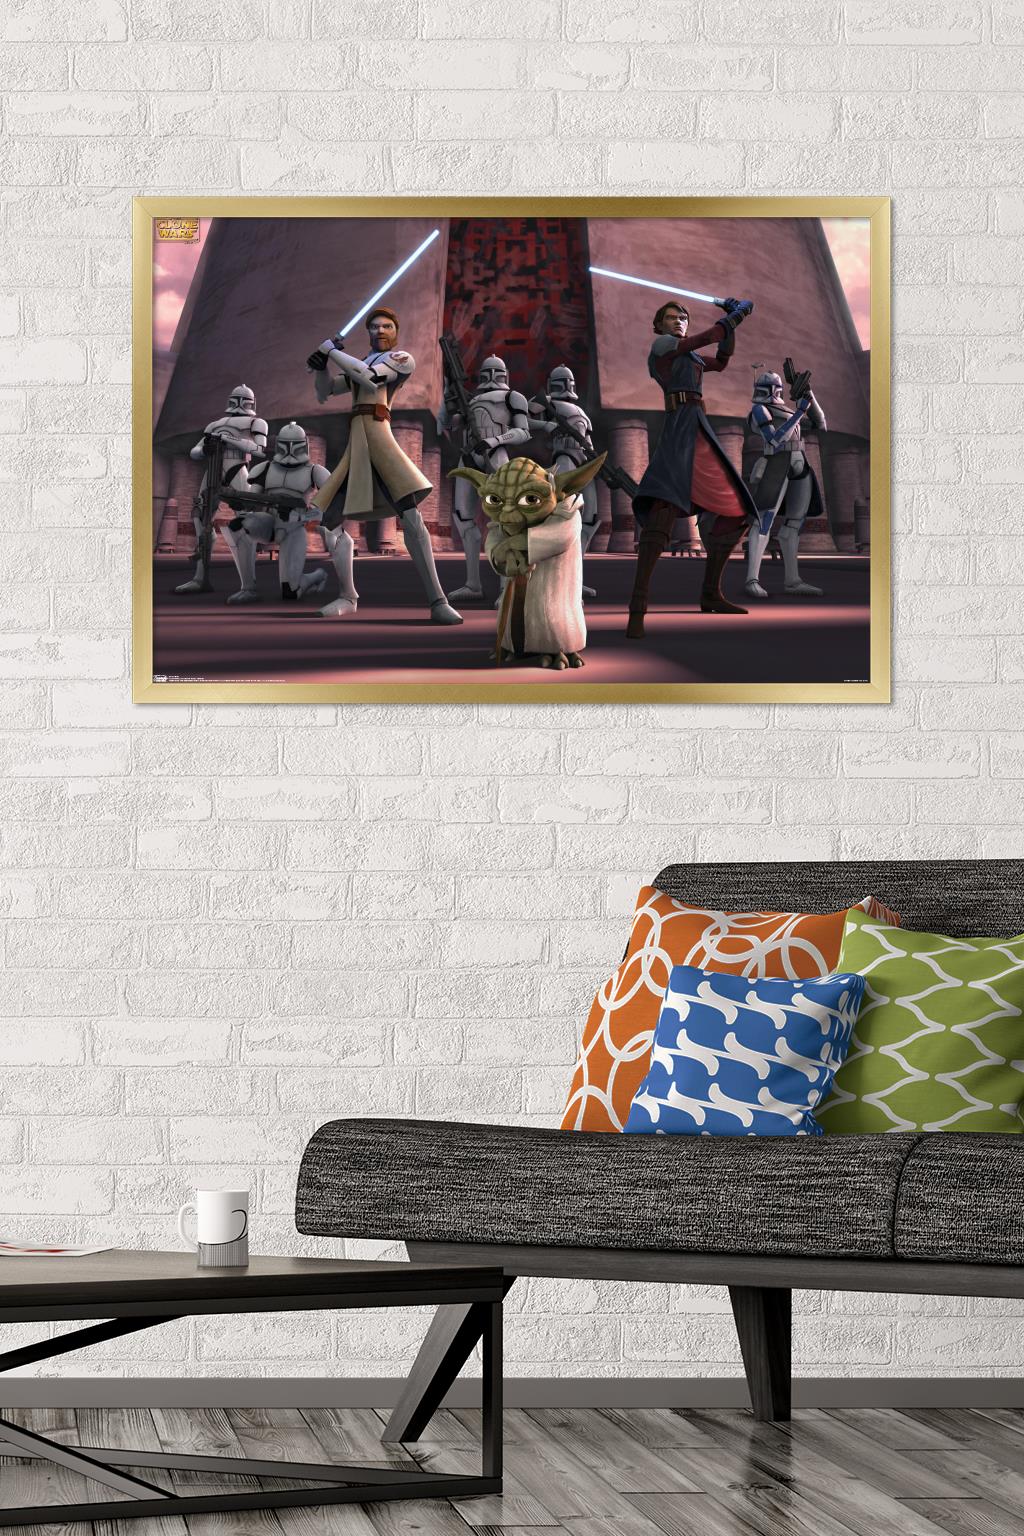 Star Wars: The Clone Wars - Group Wall Poster, 22.375" x 34", Framed - image 2 of 5